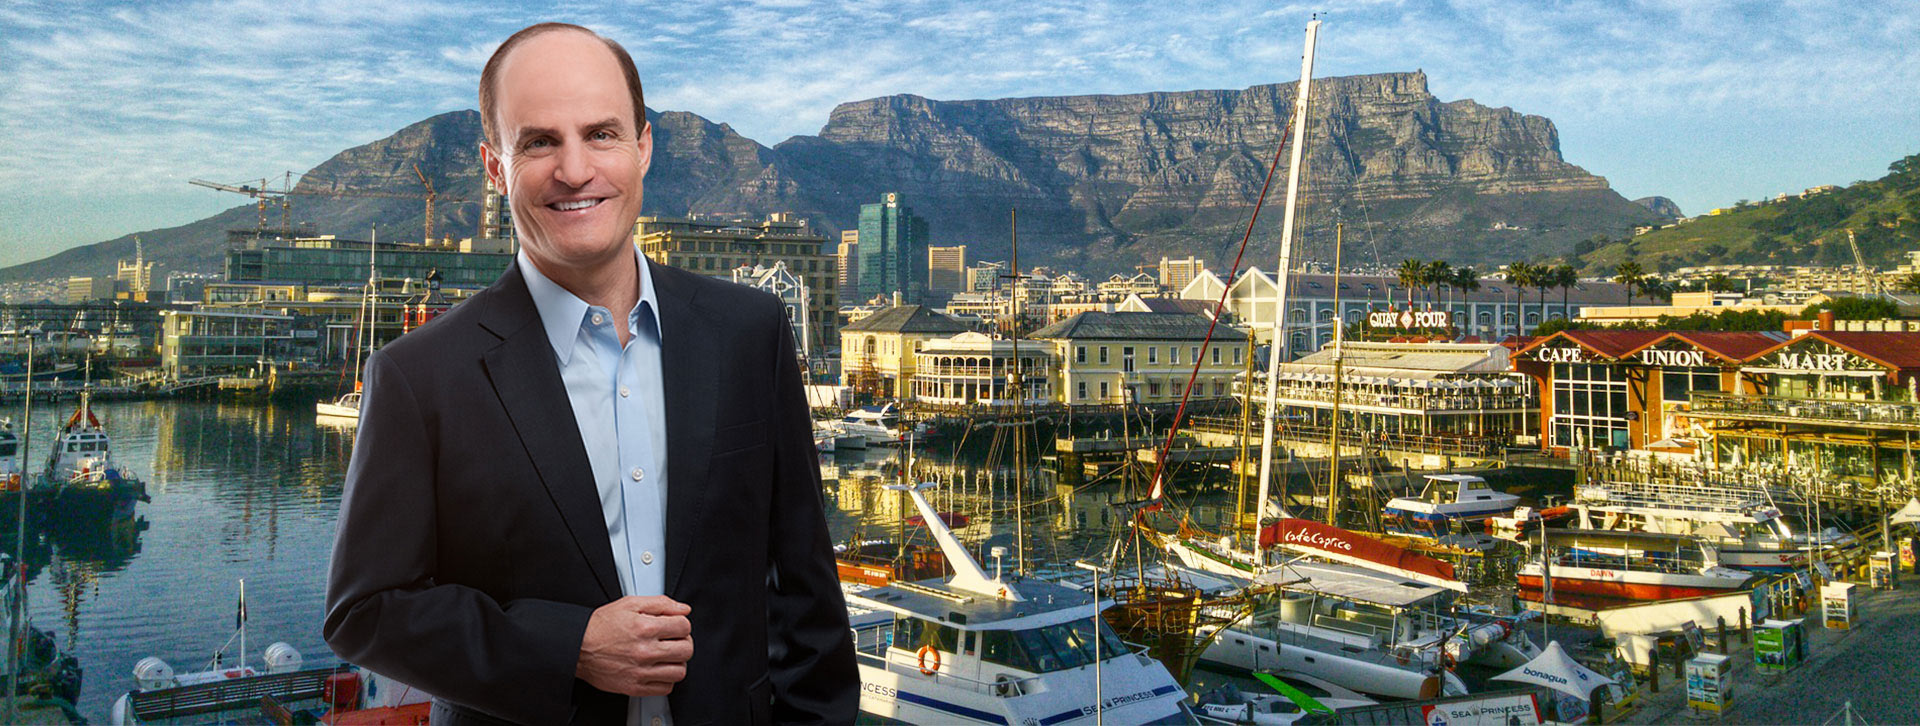 Motivational Service Excellence Keynote Speaker in Cape Town, South Africa